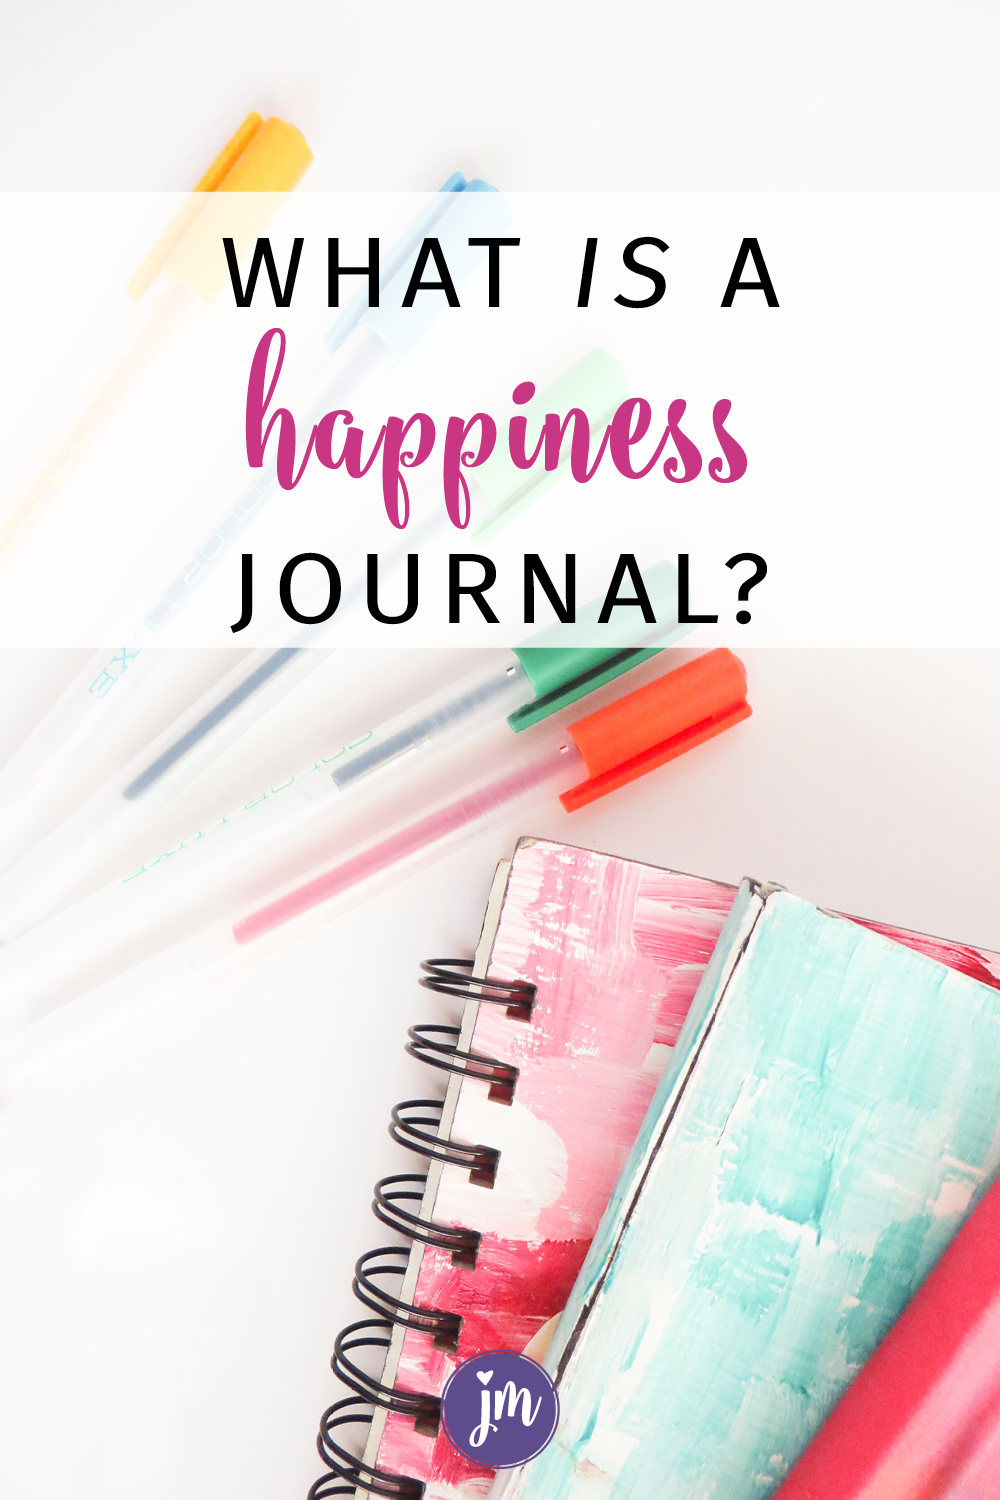 What is a happiness journal anyway? Learn how to start your own happy journal and keep track of the good in your life. This has been sooo good for me. I'm so glad I started a happy journal! This article also includes a free printable to help you get started. #happinessjournal #howtostartahappinessjournal #happyjournal